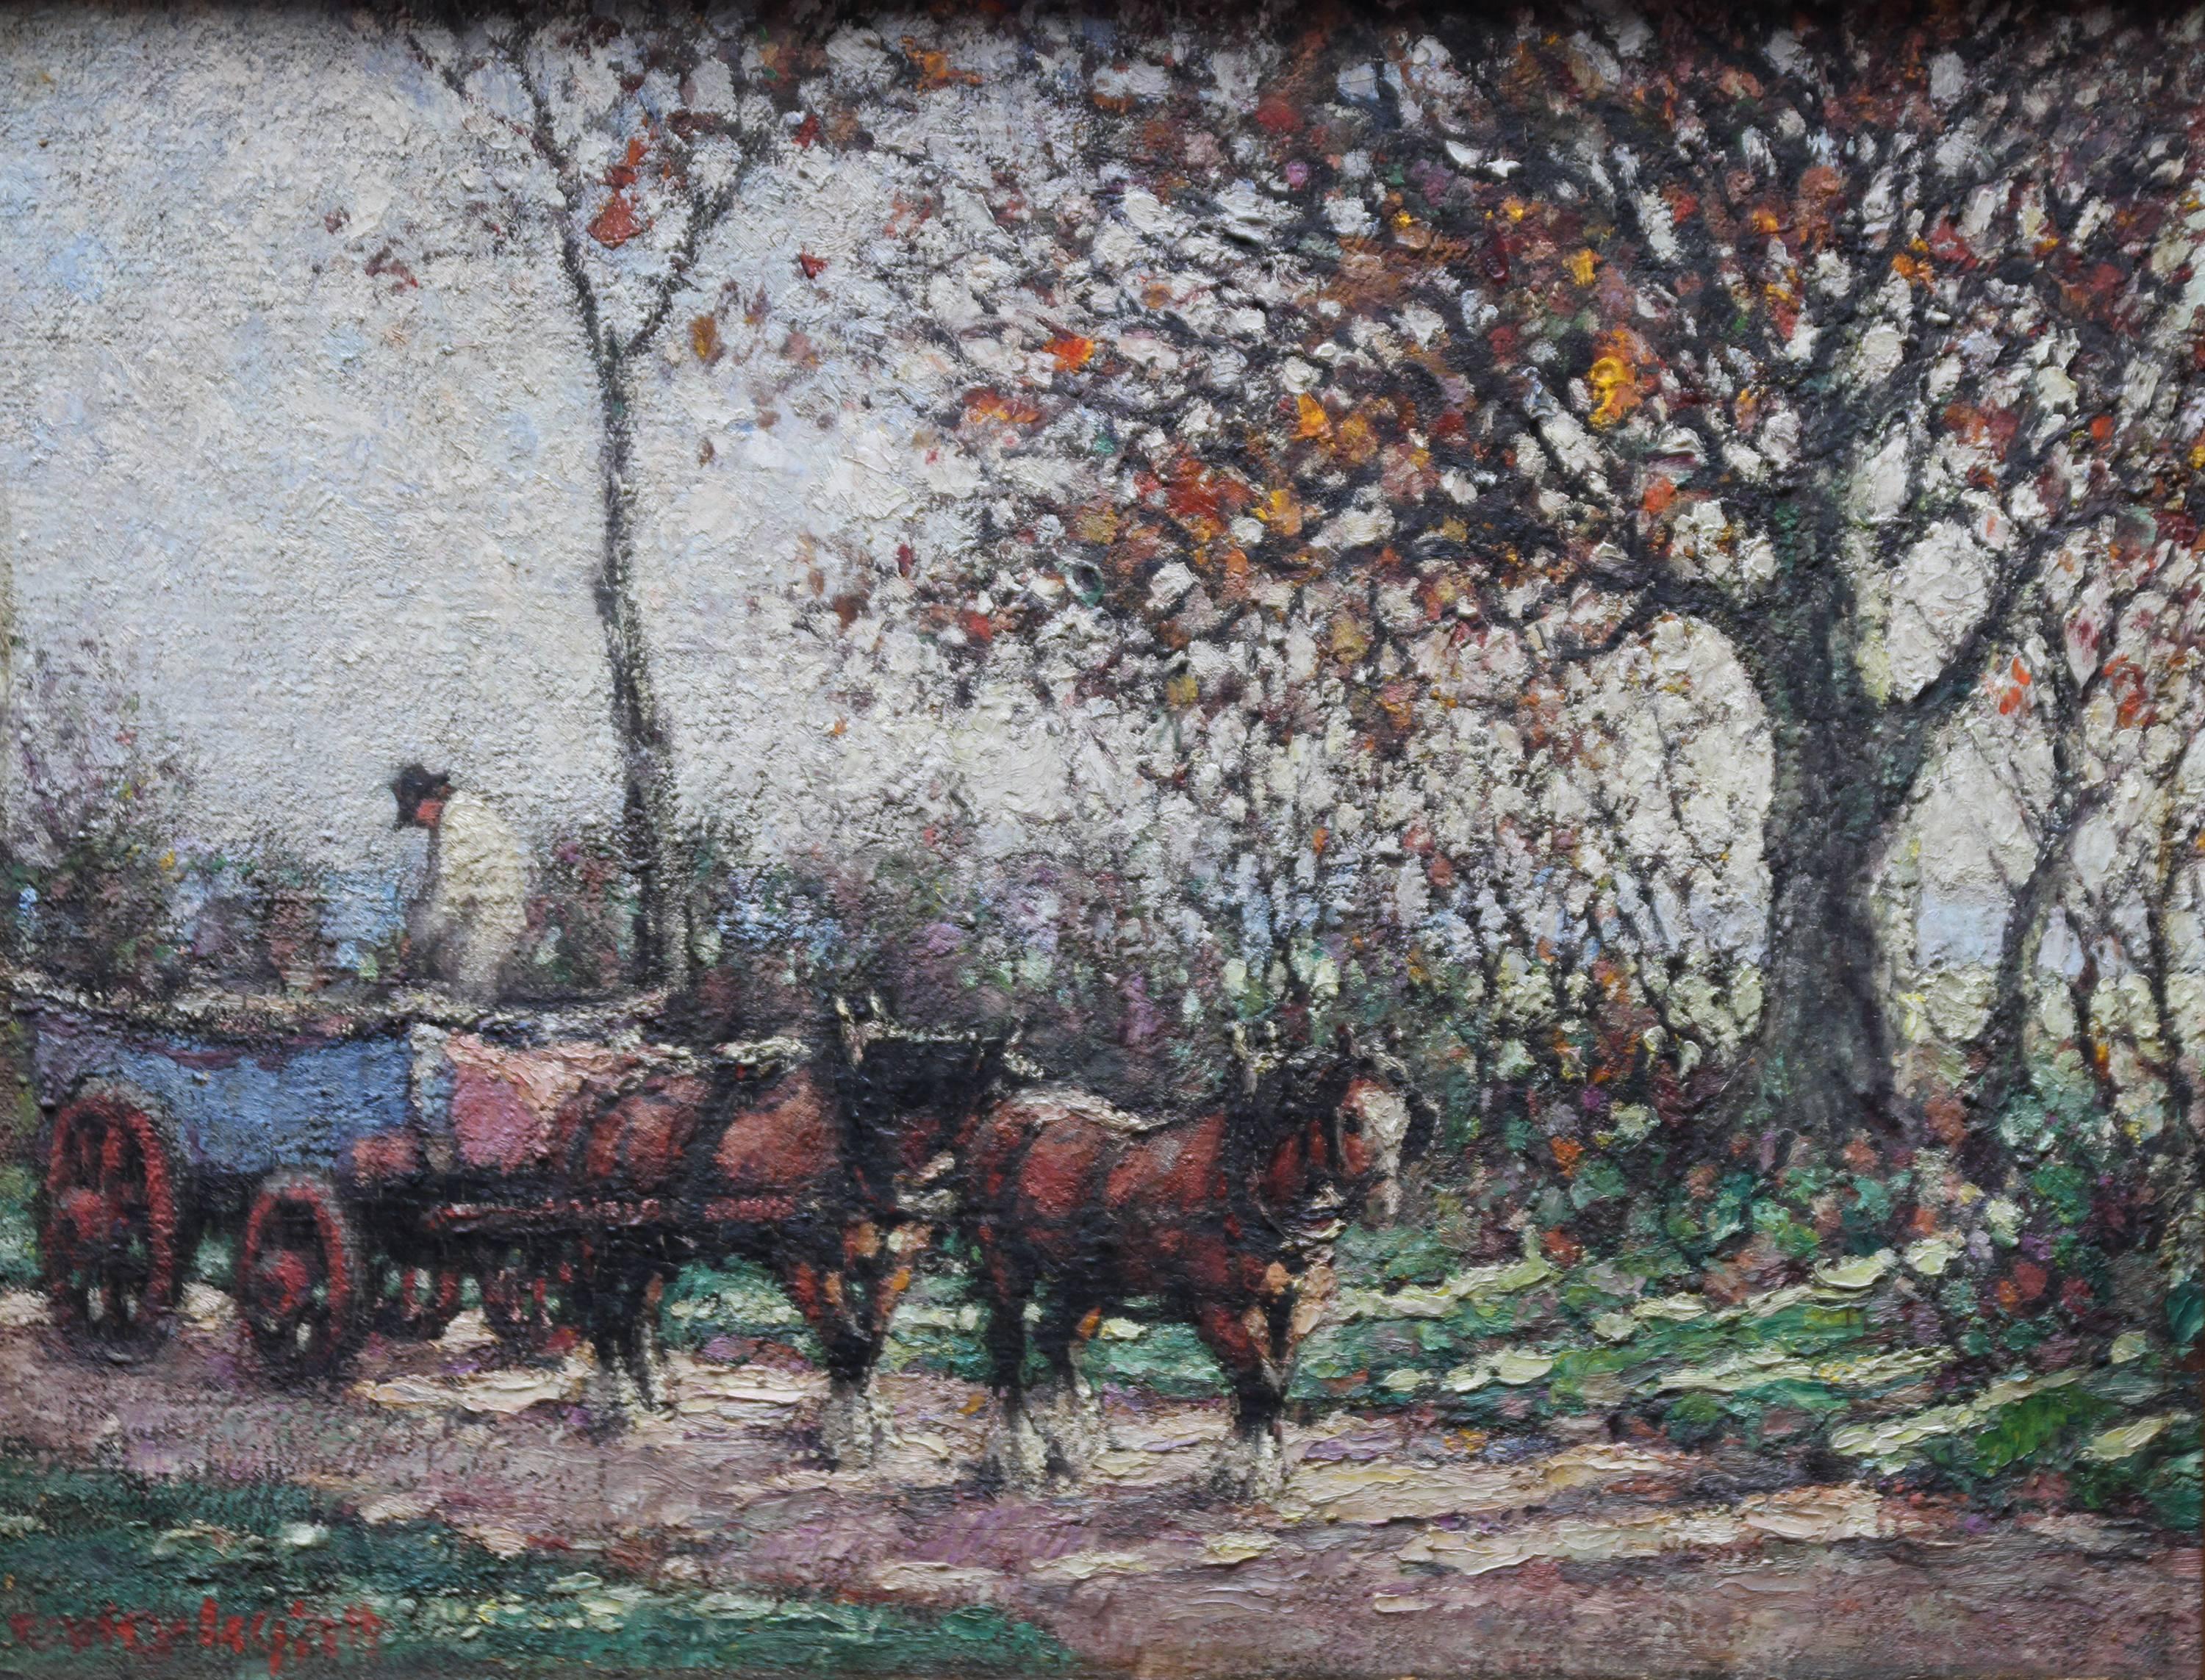 The Harvest - British art Impressionist 1918 oil painting horses cart landscape - Painting by Harry Fidler